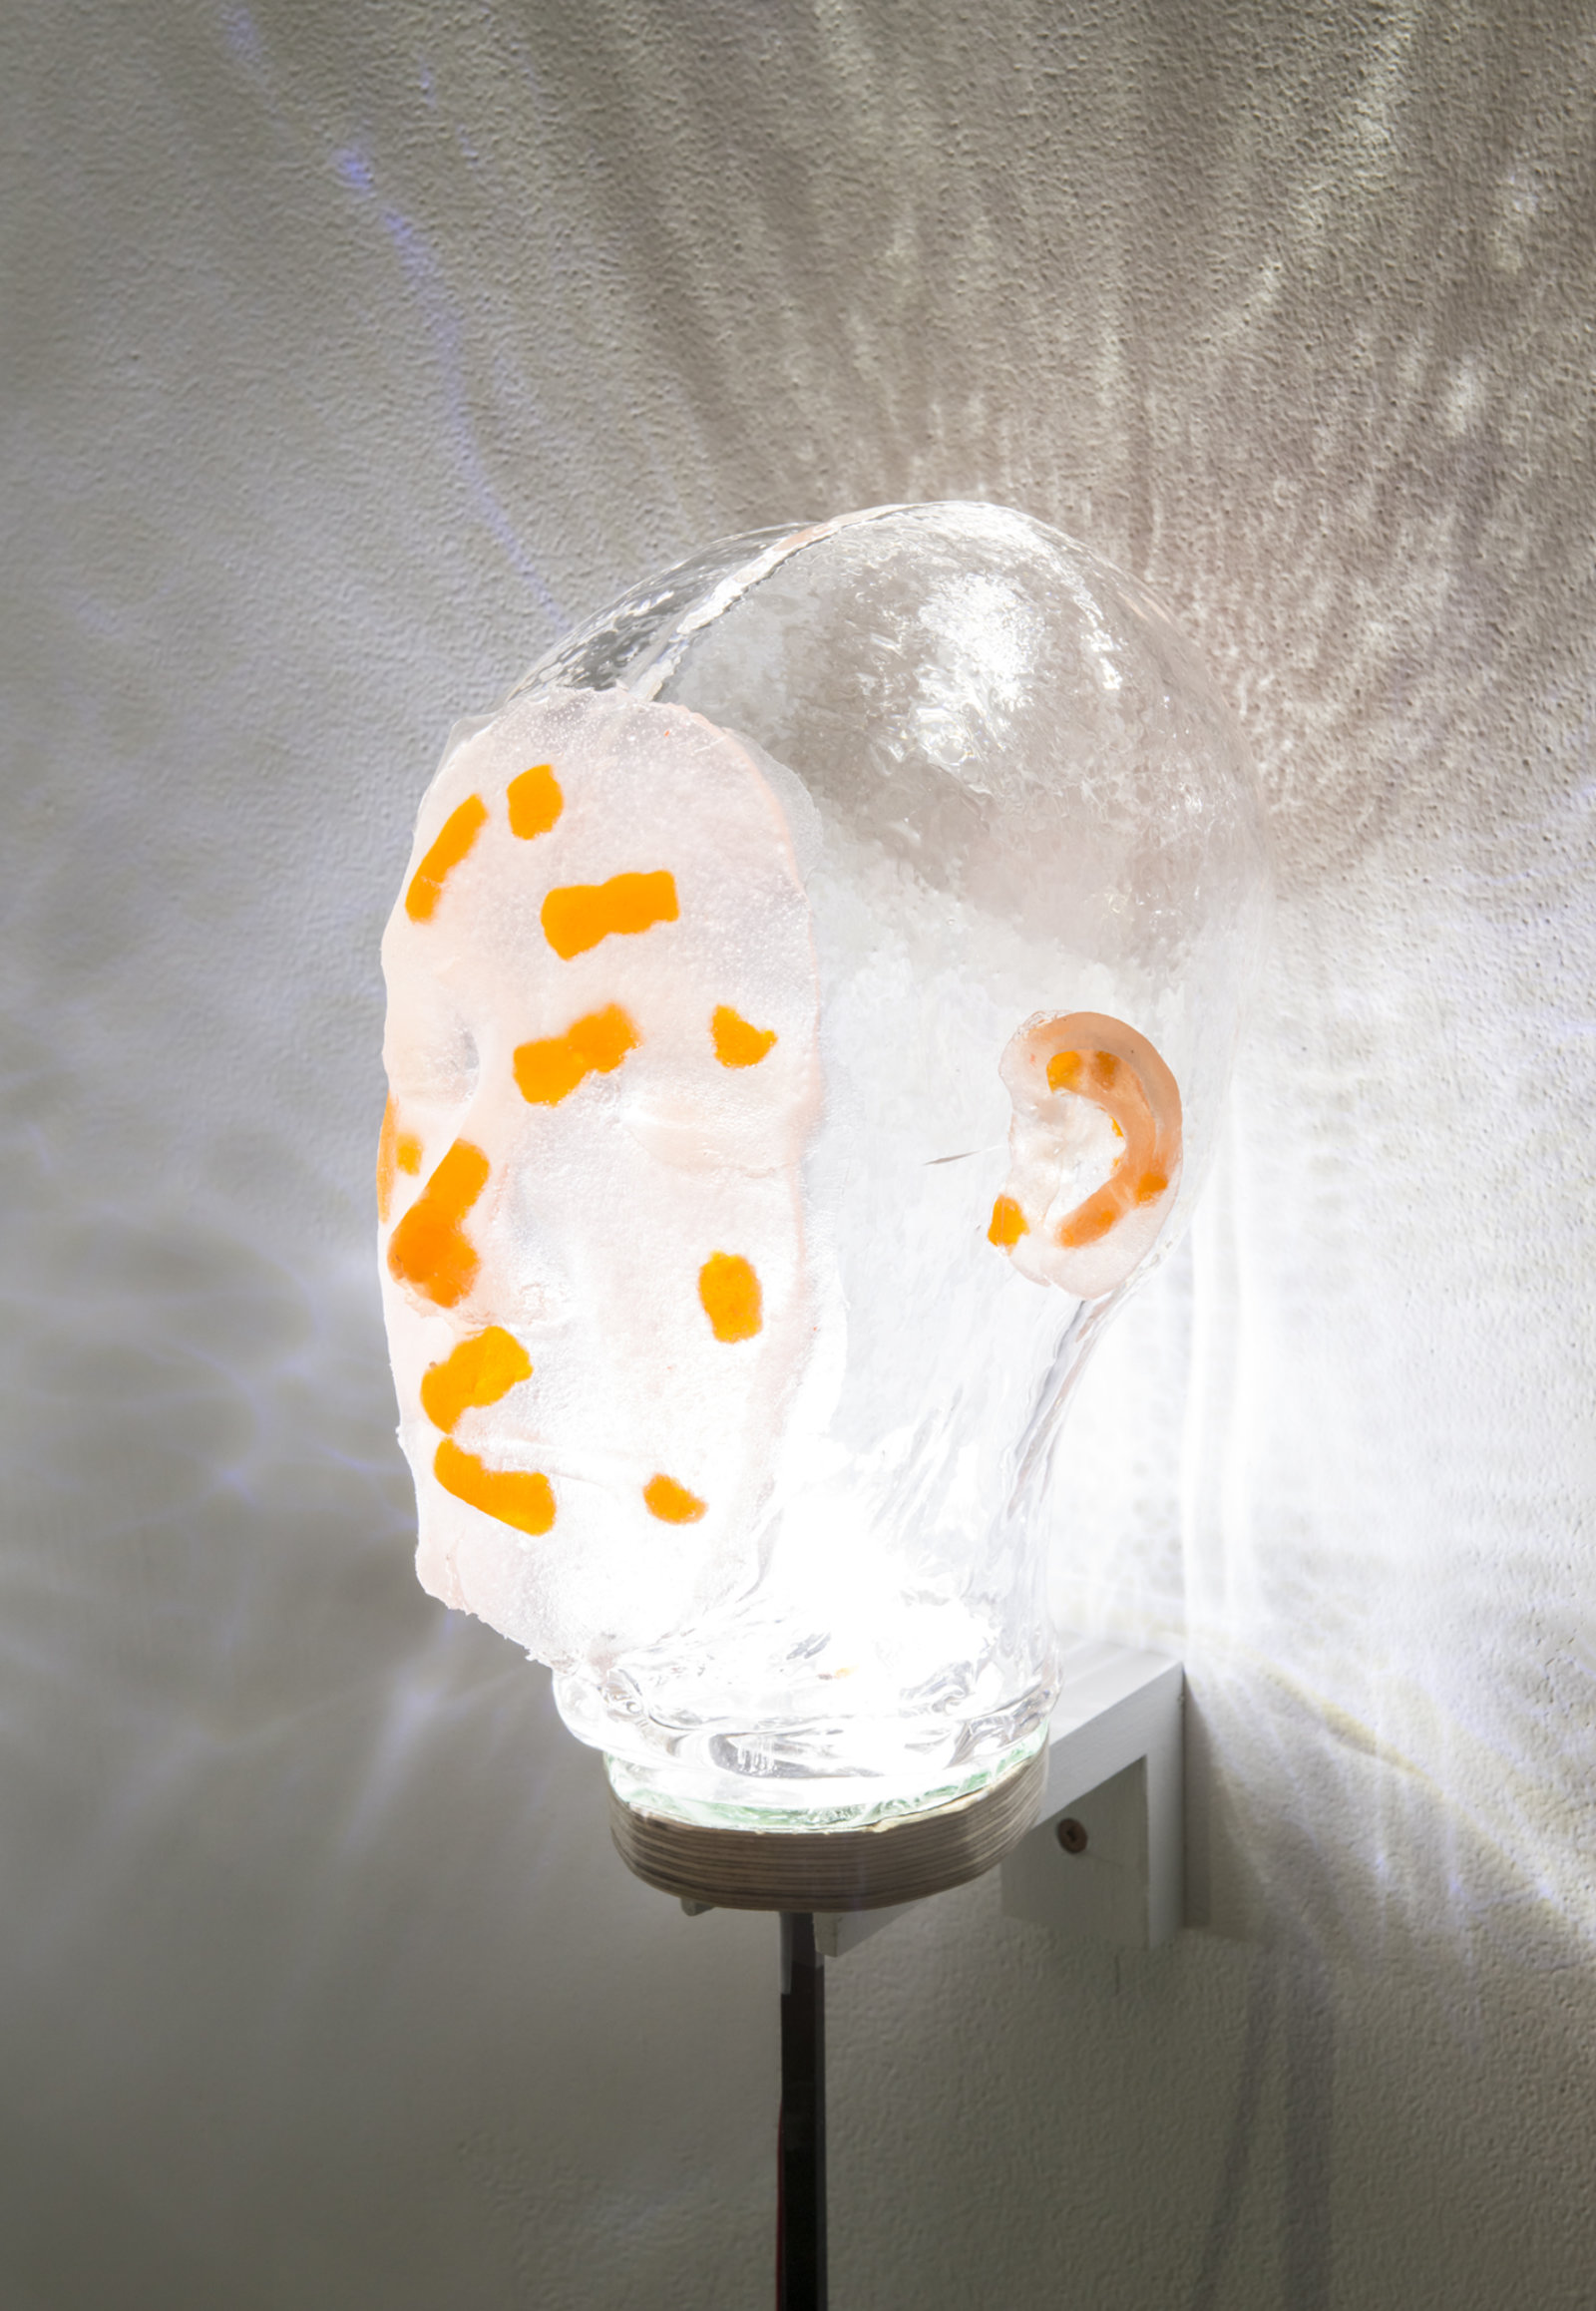 Kasper Feyrer, Witnesses (detail), 2018, sour kids, iron poker, handblown glass, dyed silicone, LED lights, 39 x 7 x 10 in. (99 x 18 x 25 cm)